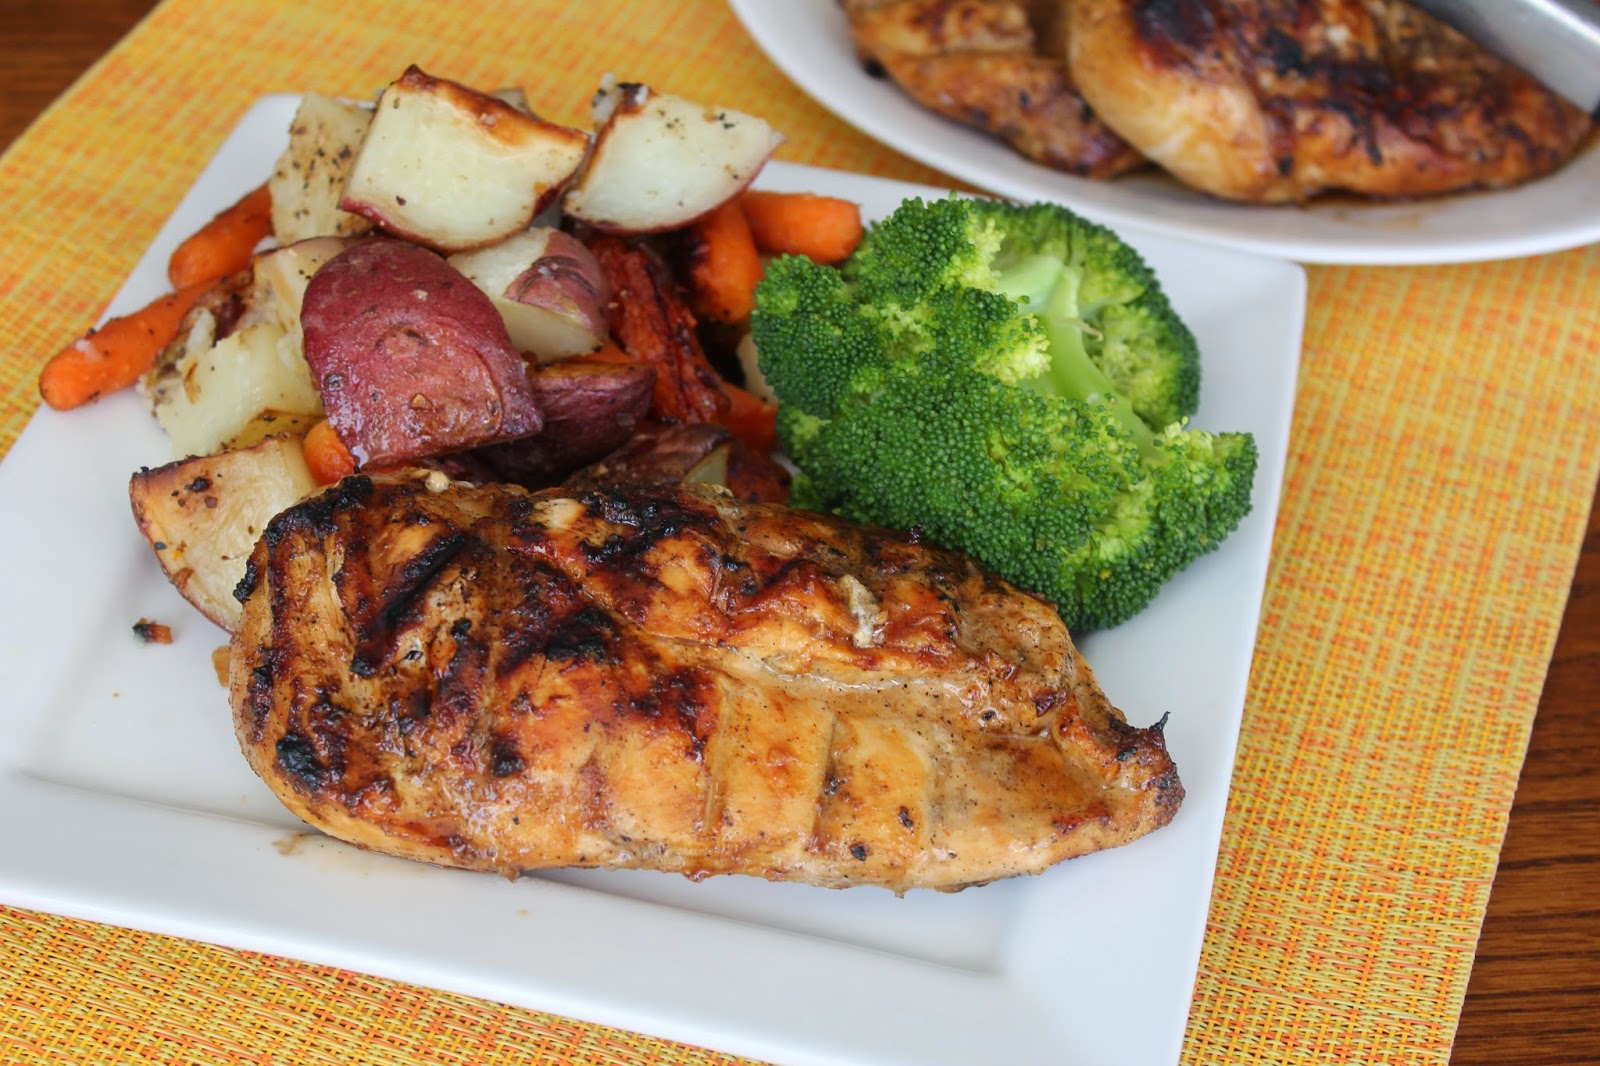 Recipe: Main Dish, Recipe: Chicken, Recipe: Healthy, low calorie, grilled chicken, Recipe: Side Dish, red potatoes, carrots, quick and easy dinner, Dinners under $10, Deals to Meals, save money on groceries, 